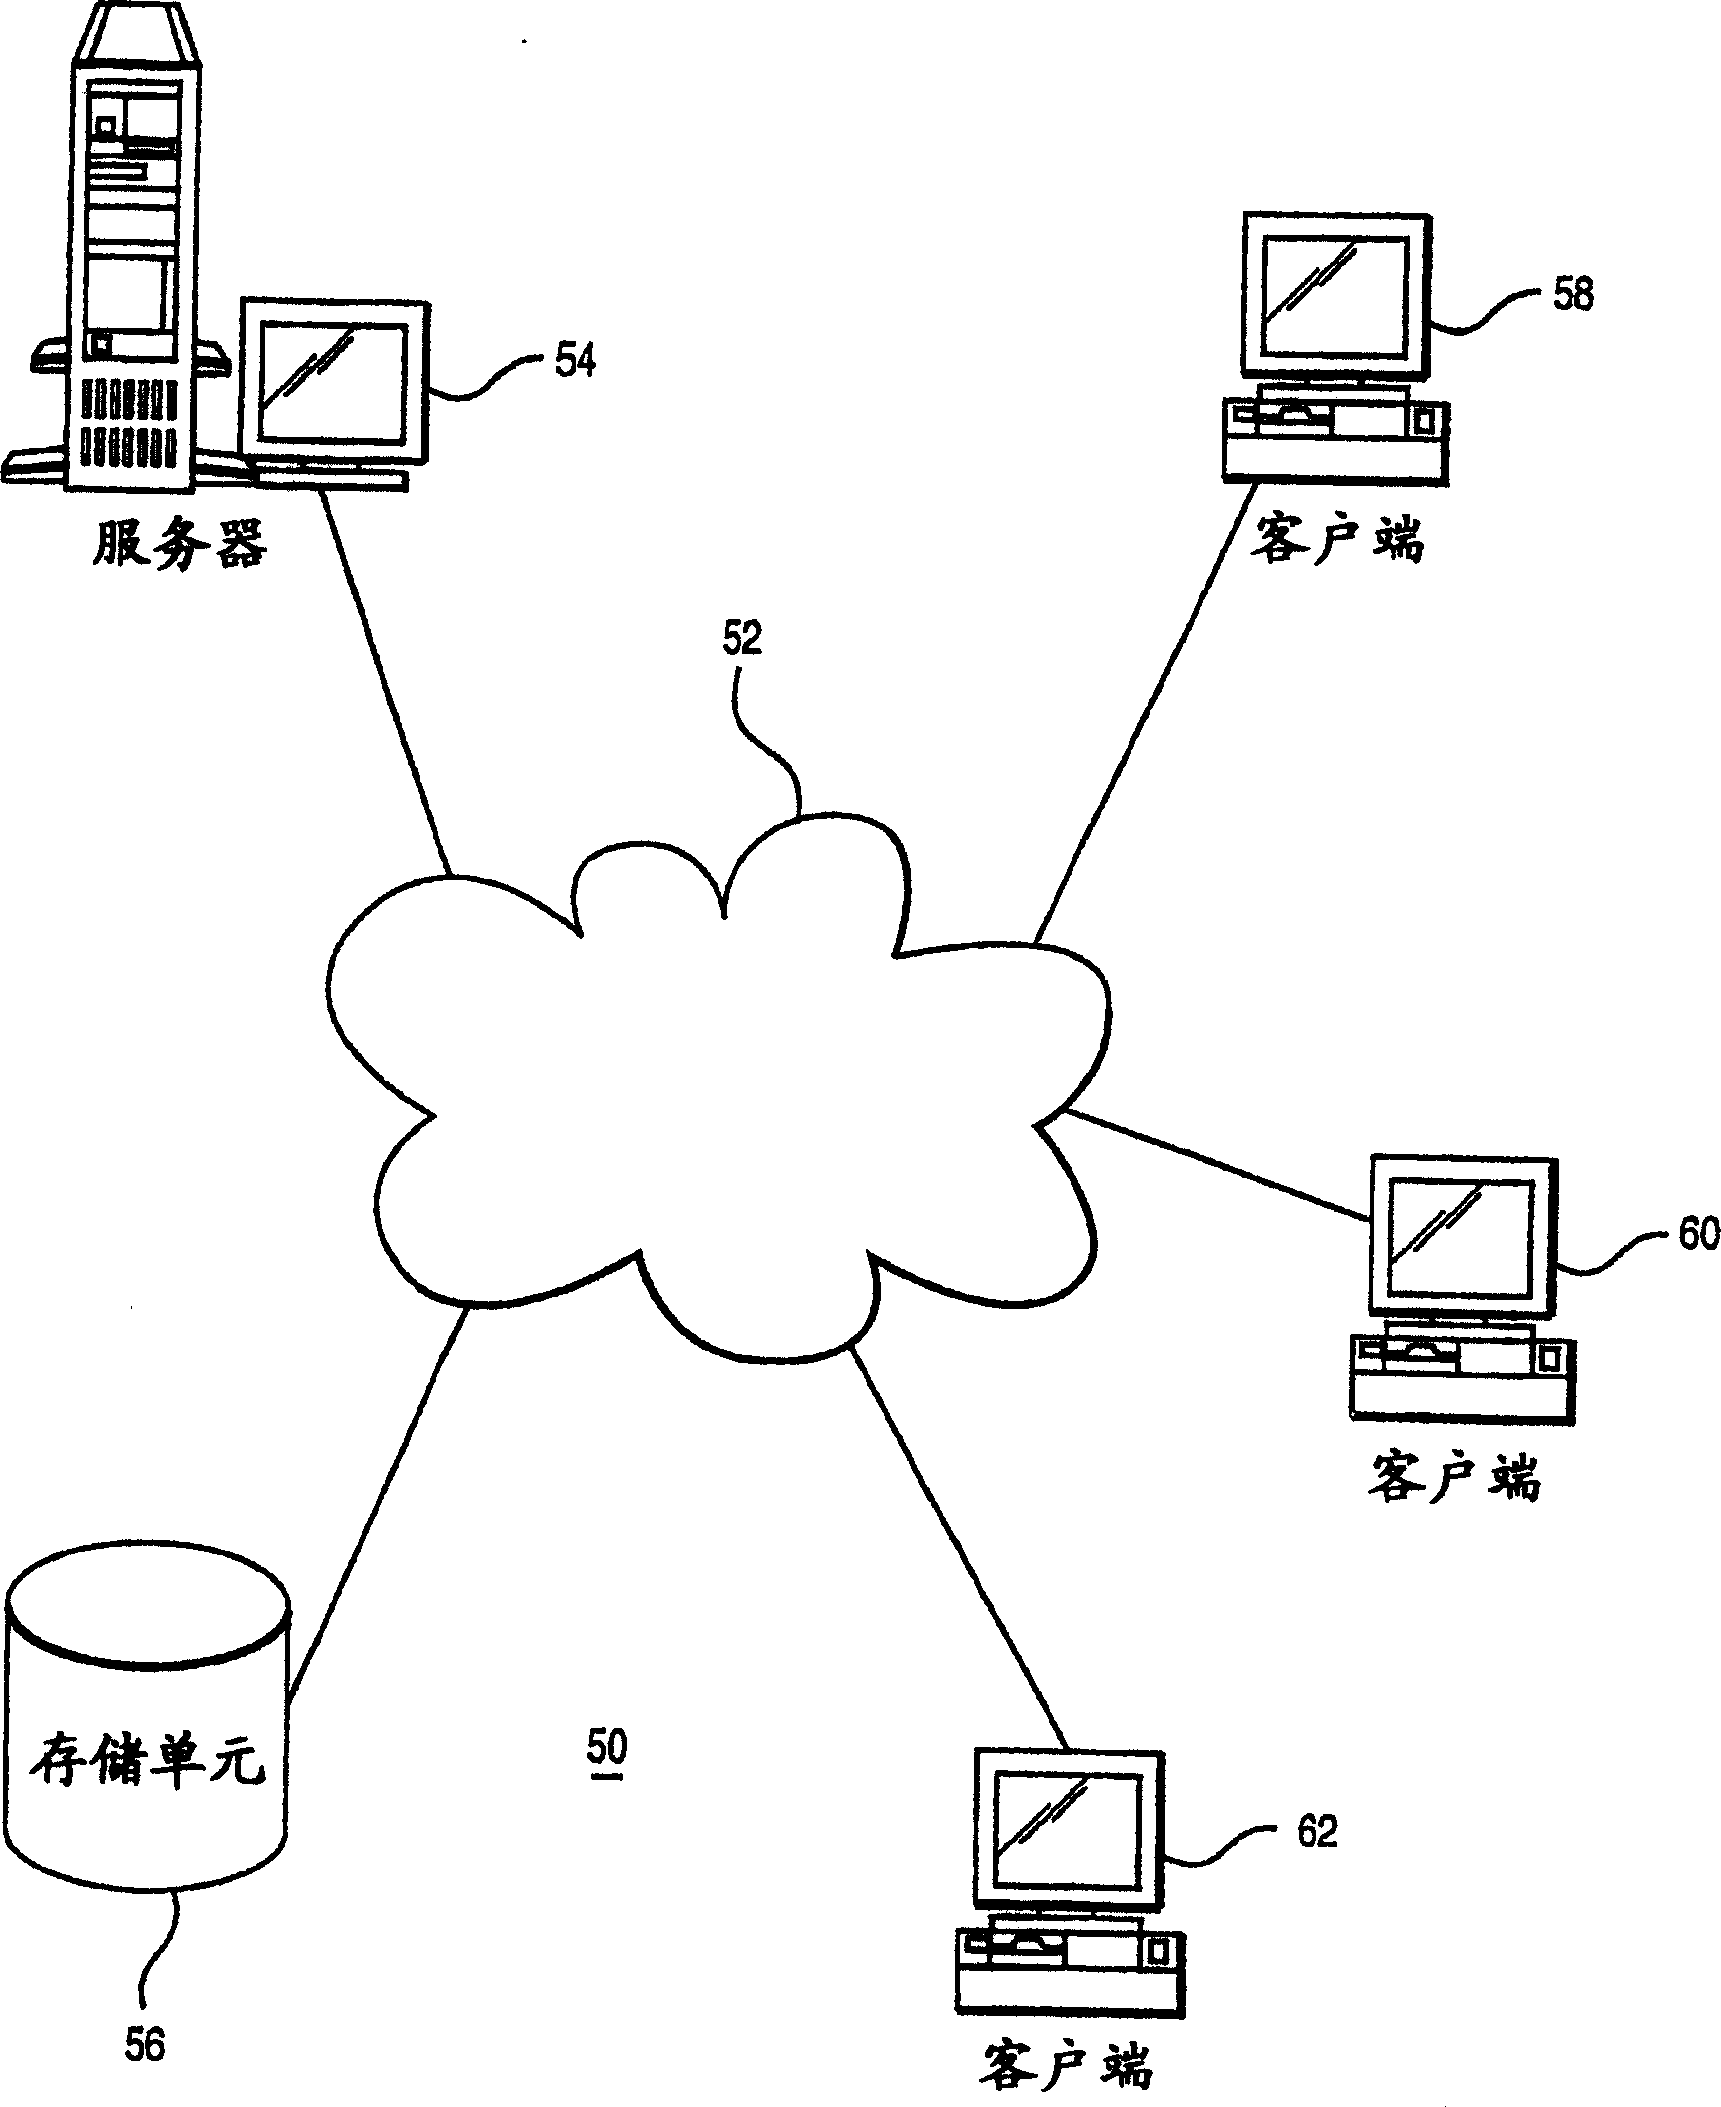 System and apparatus for eliminating user interaction during hardware configuration at system boot